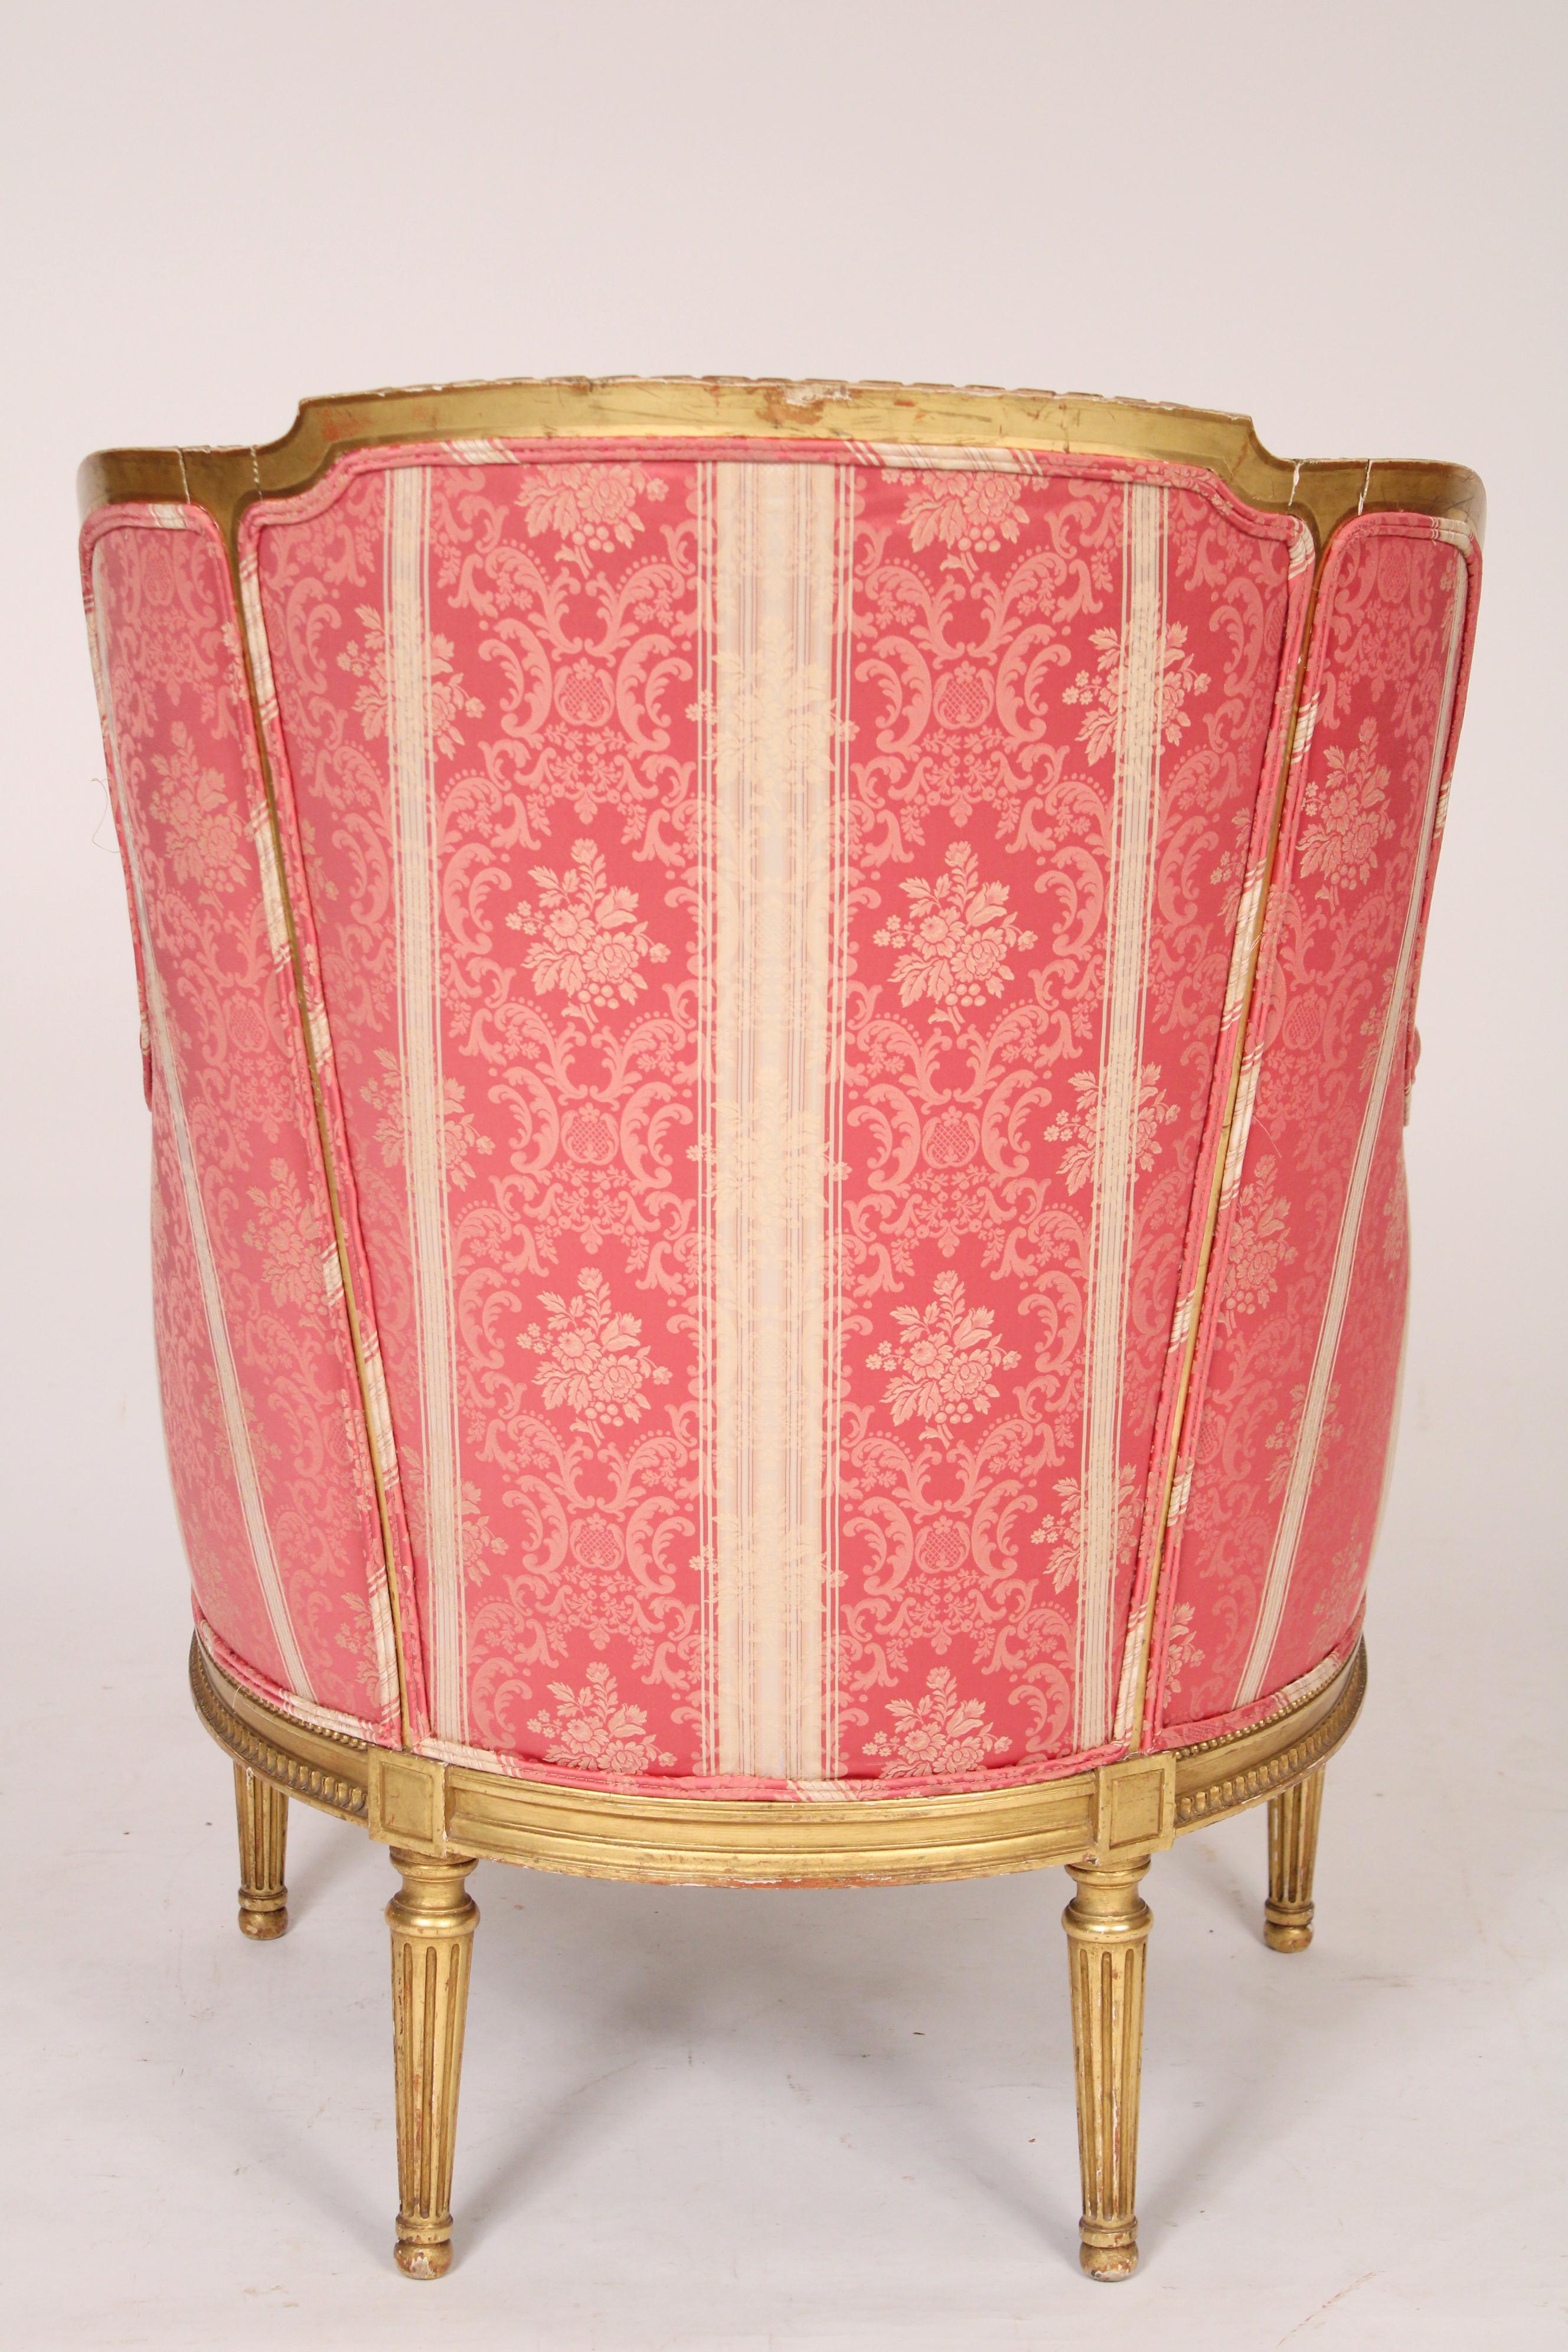 Antique Louis XVI Style Gilt Wood Bergere In Good Condition For Sale In Laguna Beach, CA